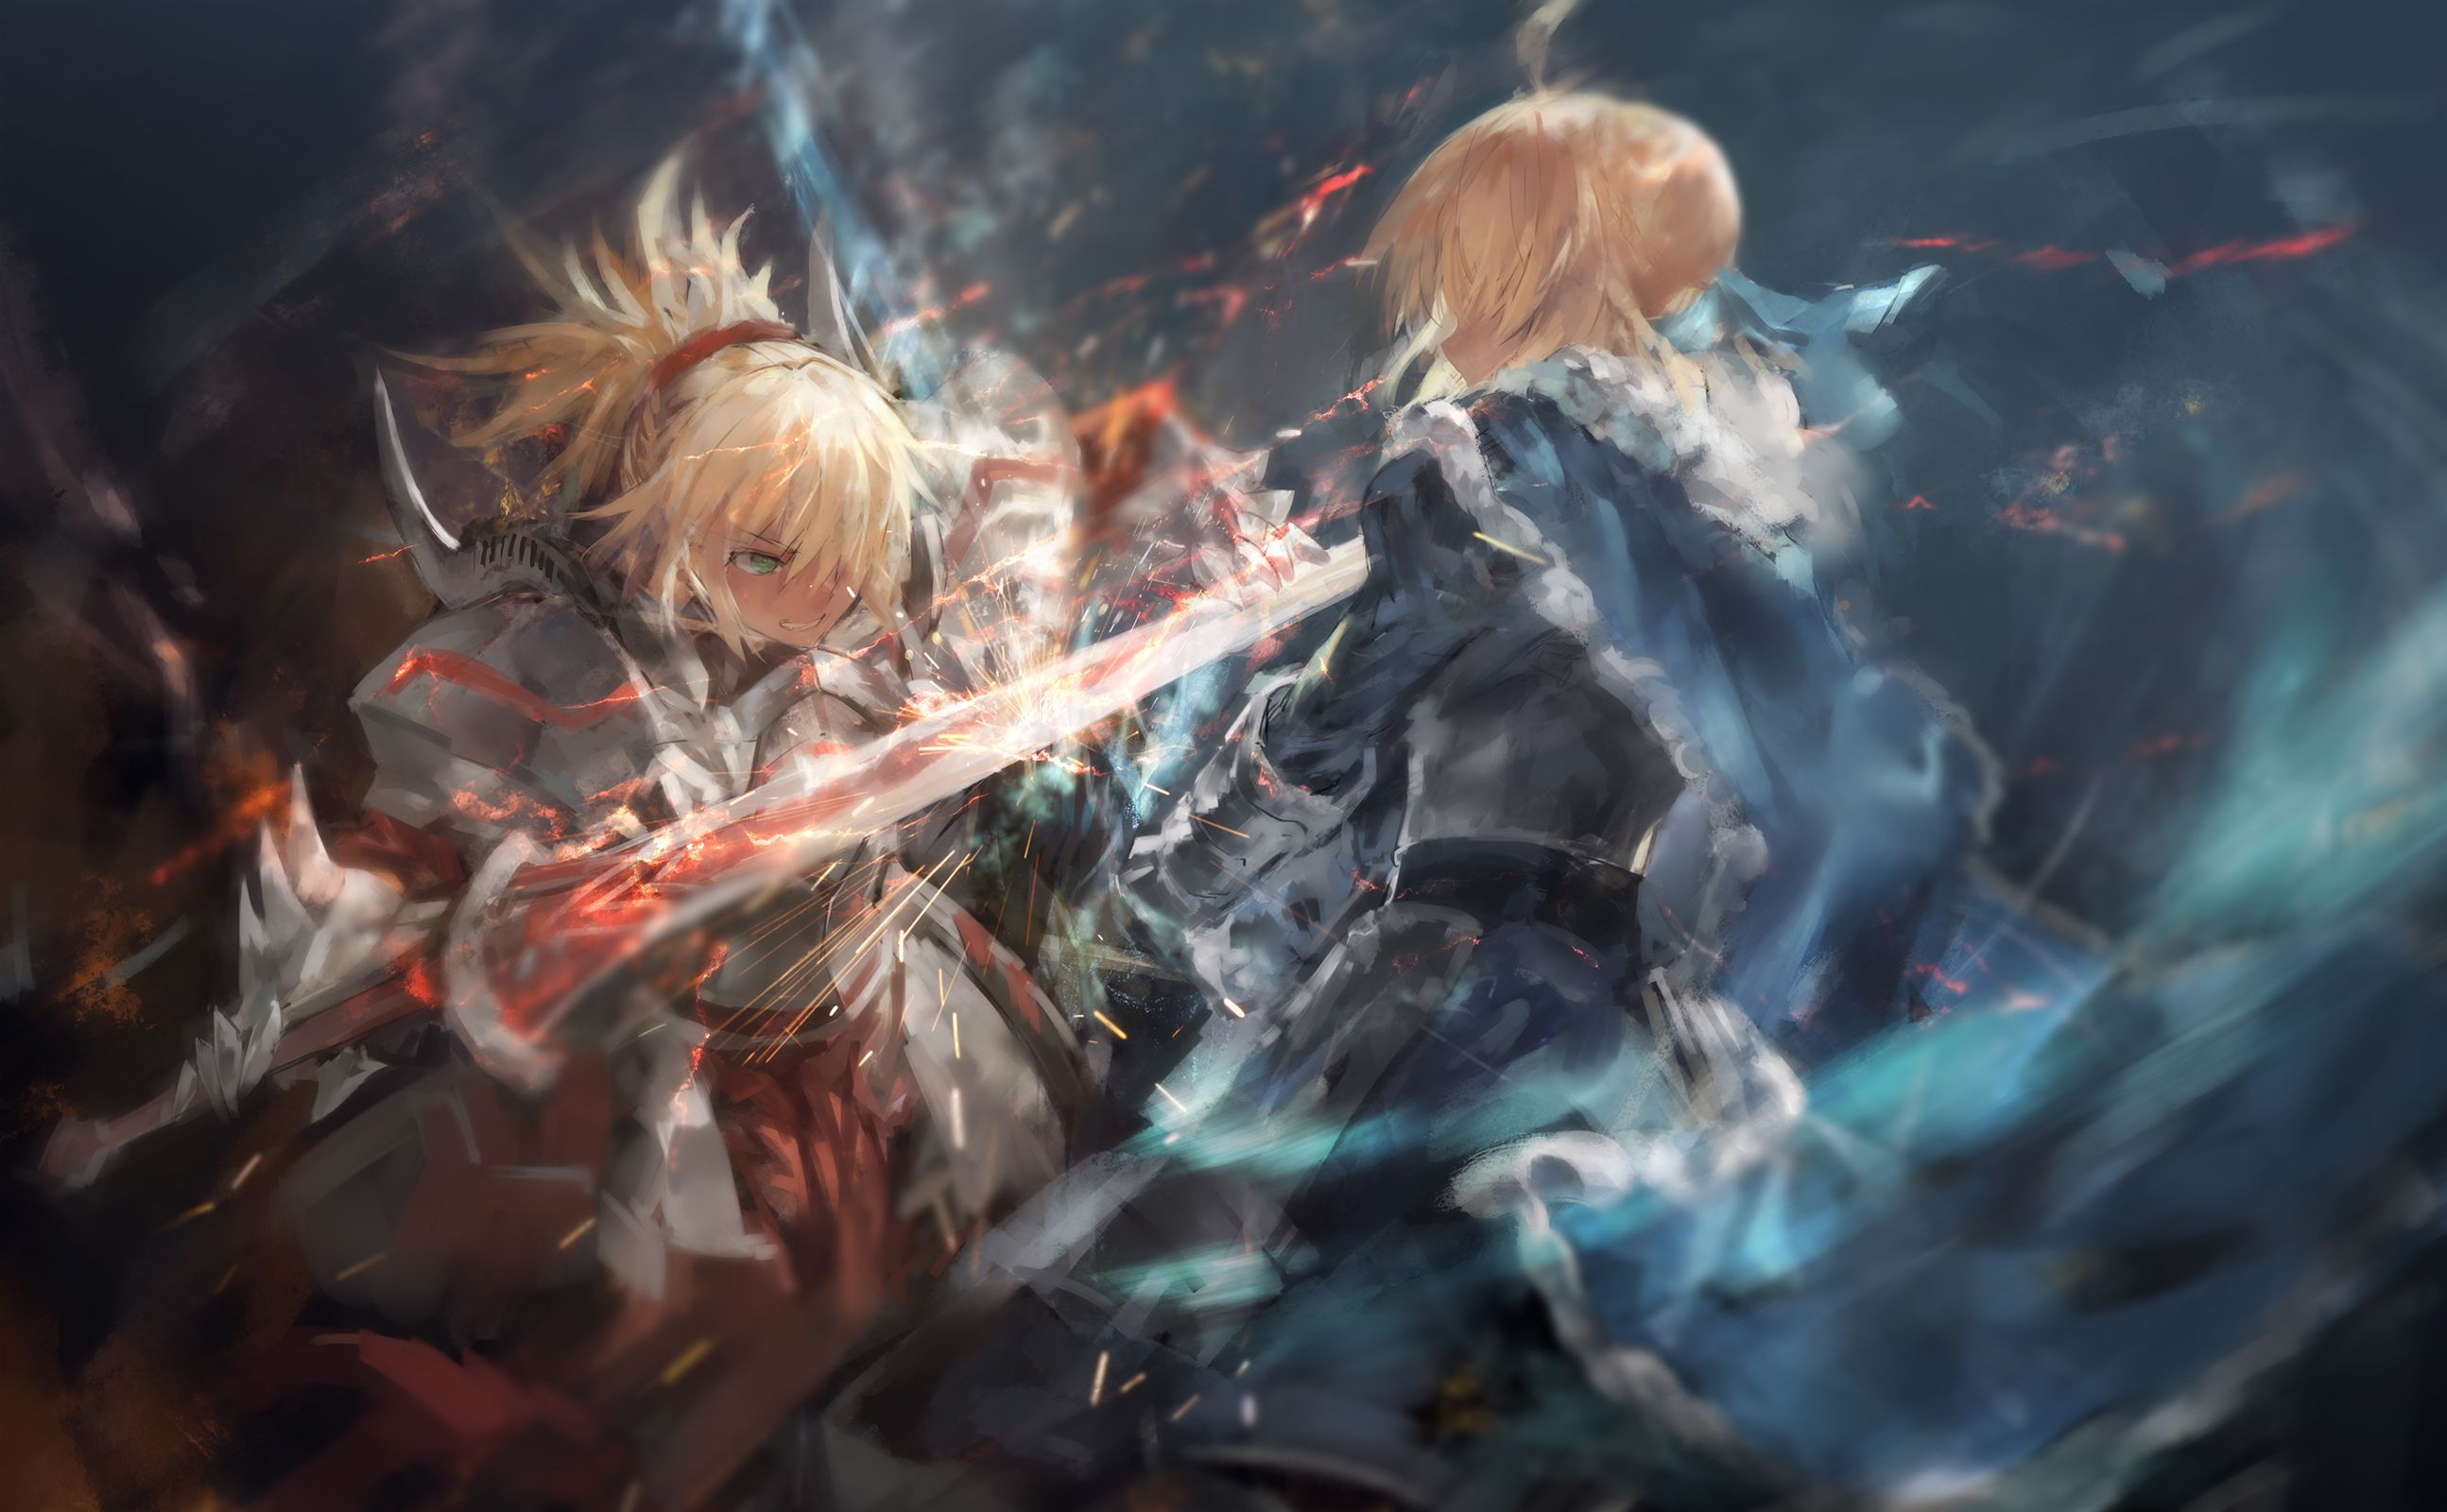 Fate Apocrypha Wallpaper Free Fate Apocrypha Background